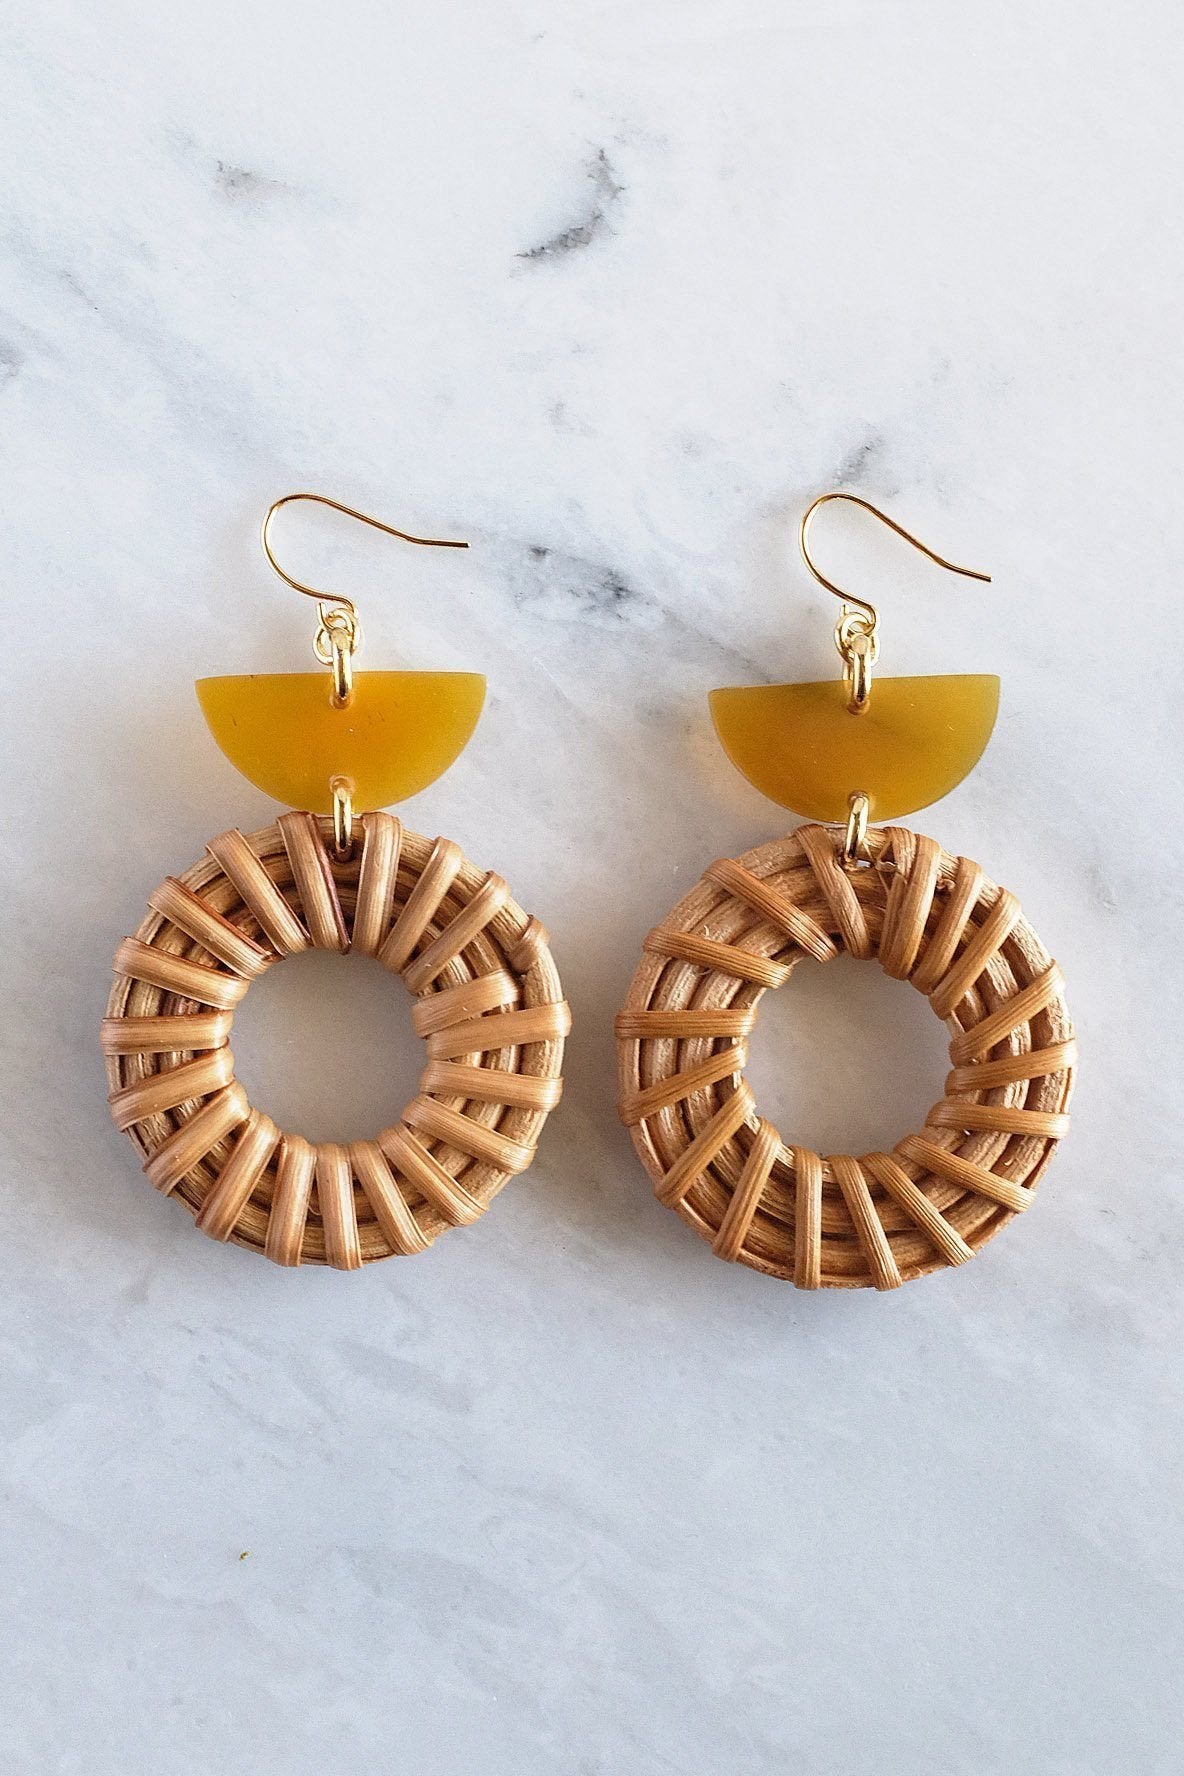 Ninh Binh 16K Gold Plated Brass Horn & Rattan (Straw/Wicker) Crescent & Donut Earringscategory_Accessories from Hathorway - SHOPELEOS